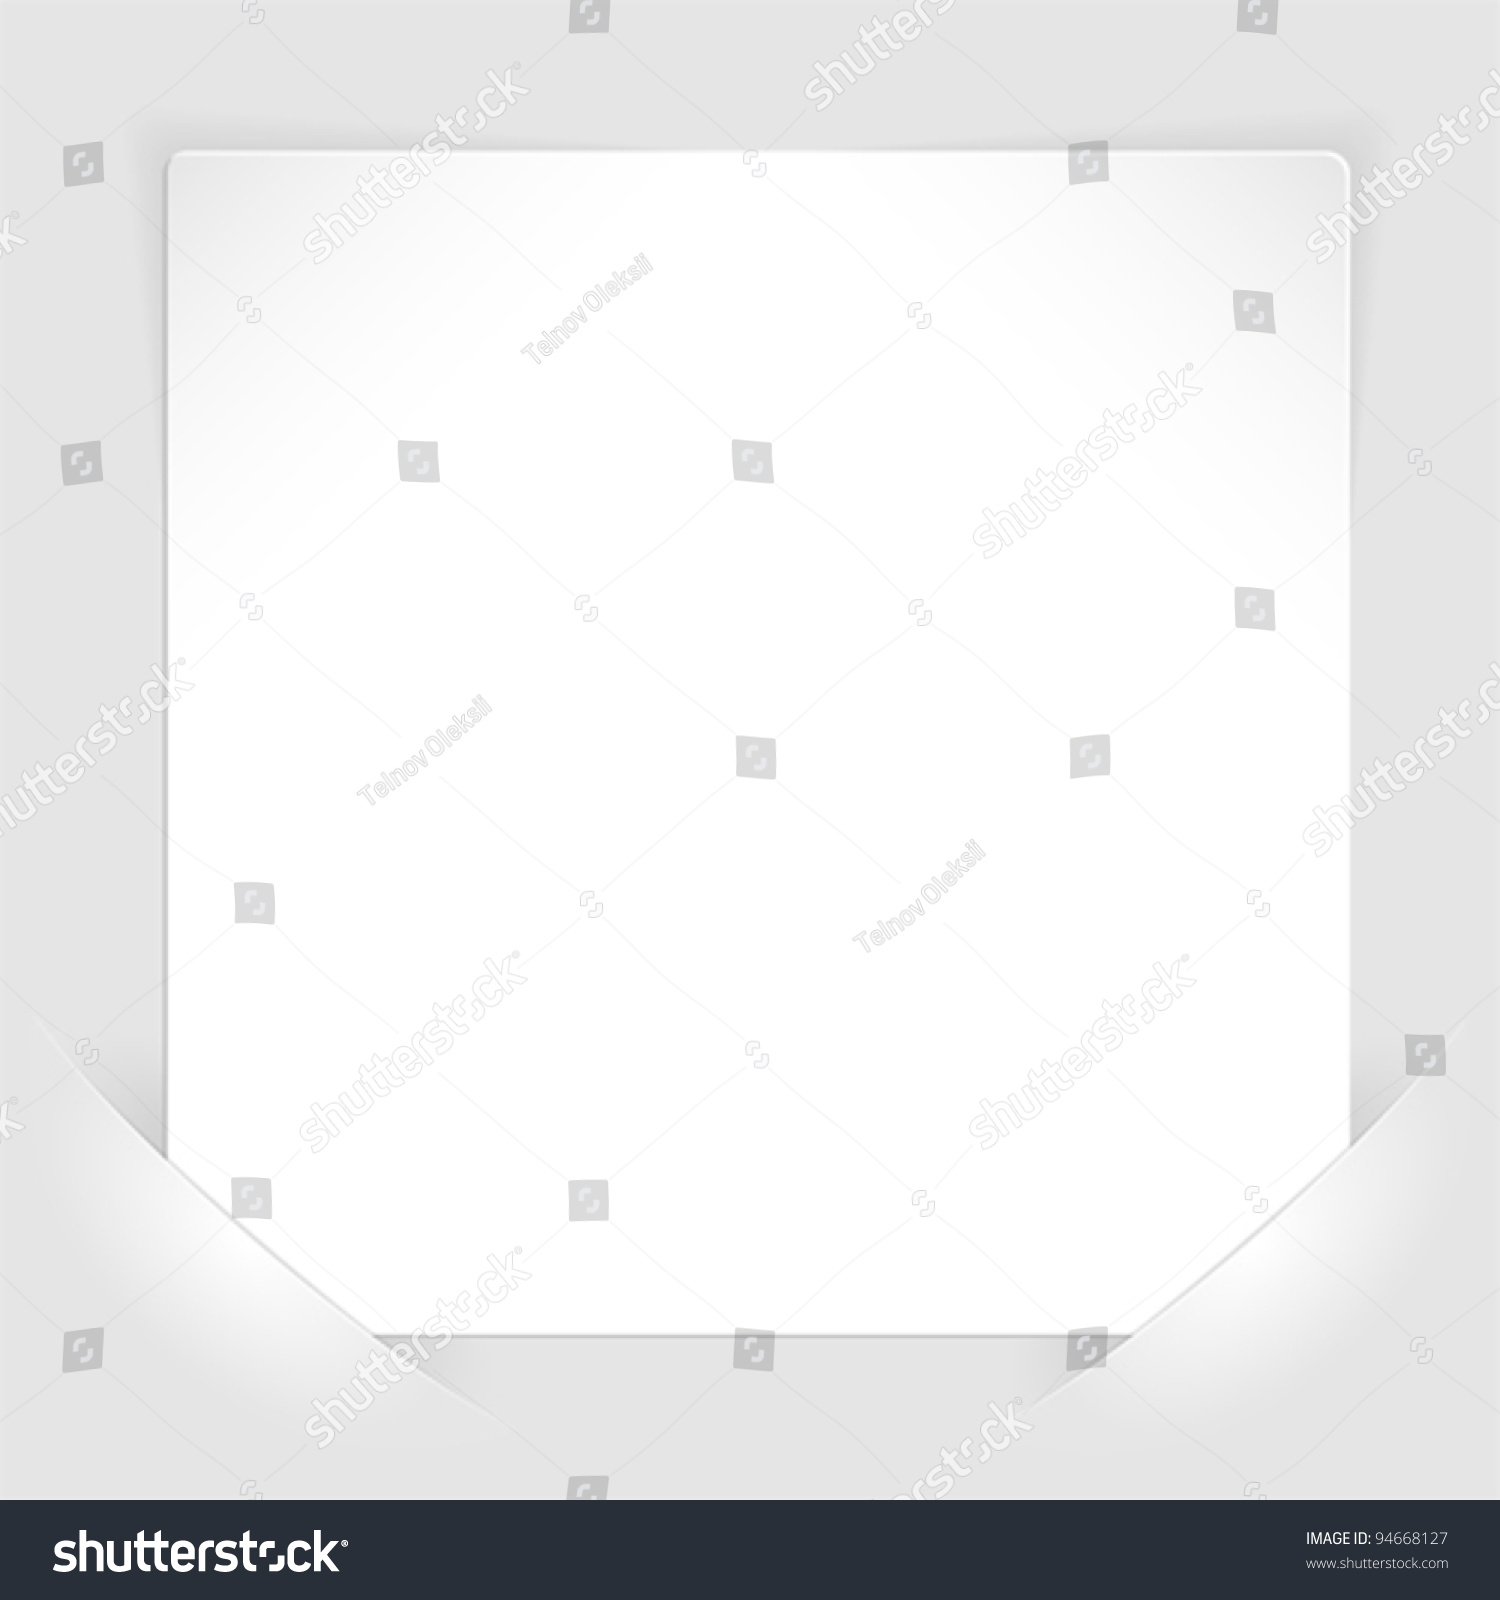 SVG of Sheet of white paper for your text or photos, mounted in pockets, template for design svg